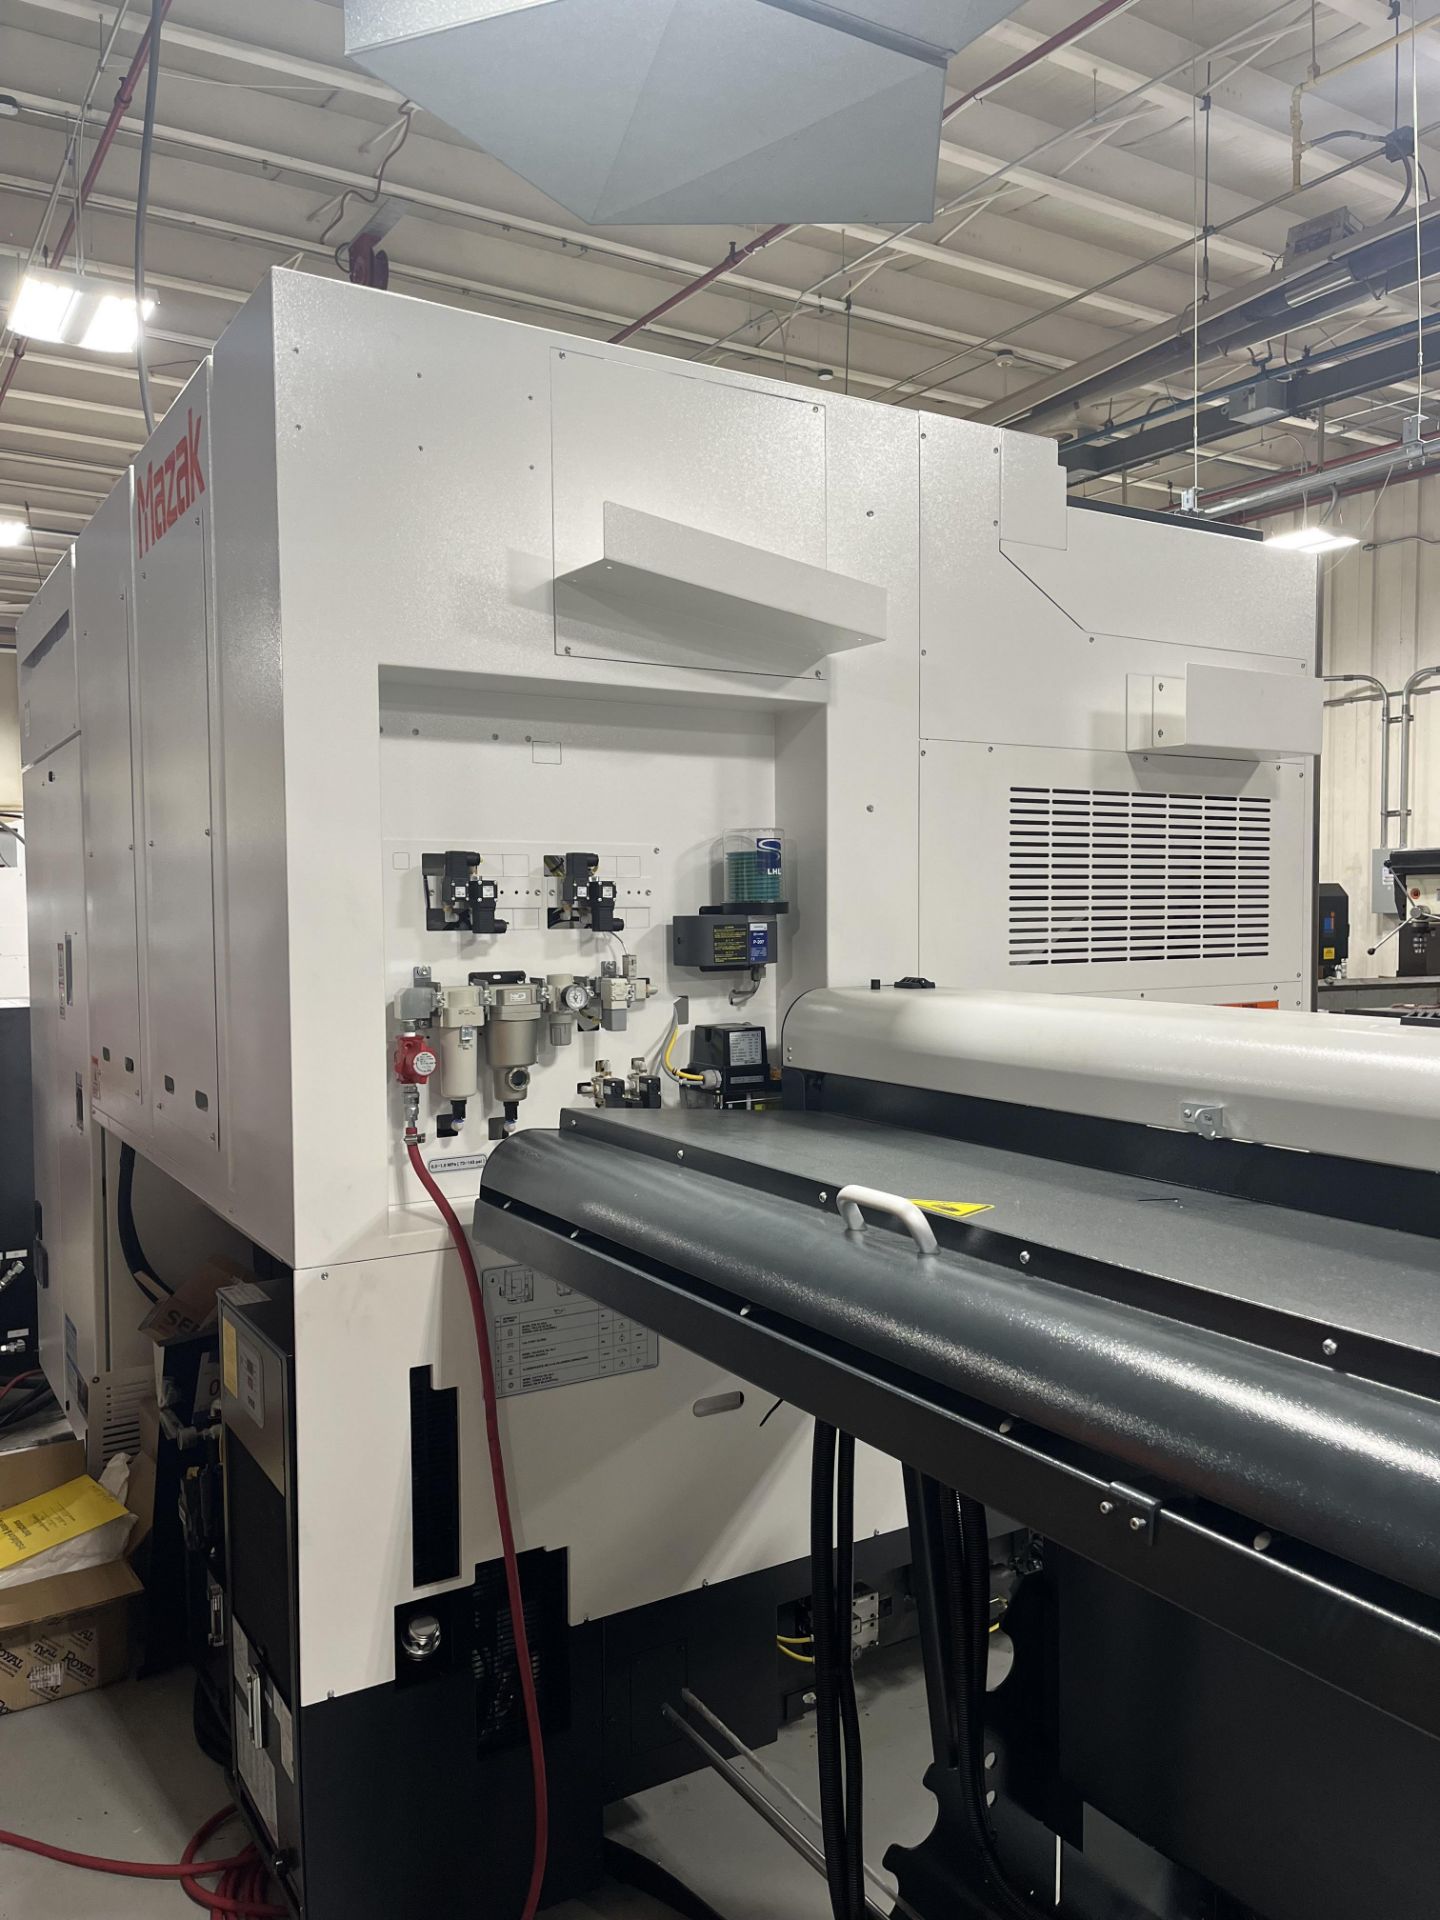 2022 Mazak HQR-100MSY Twin Turret / Twin Spindle / Live Tooling / Bar Feeder CNC Lathe - Image 5 of 13